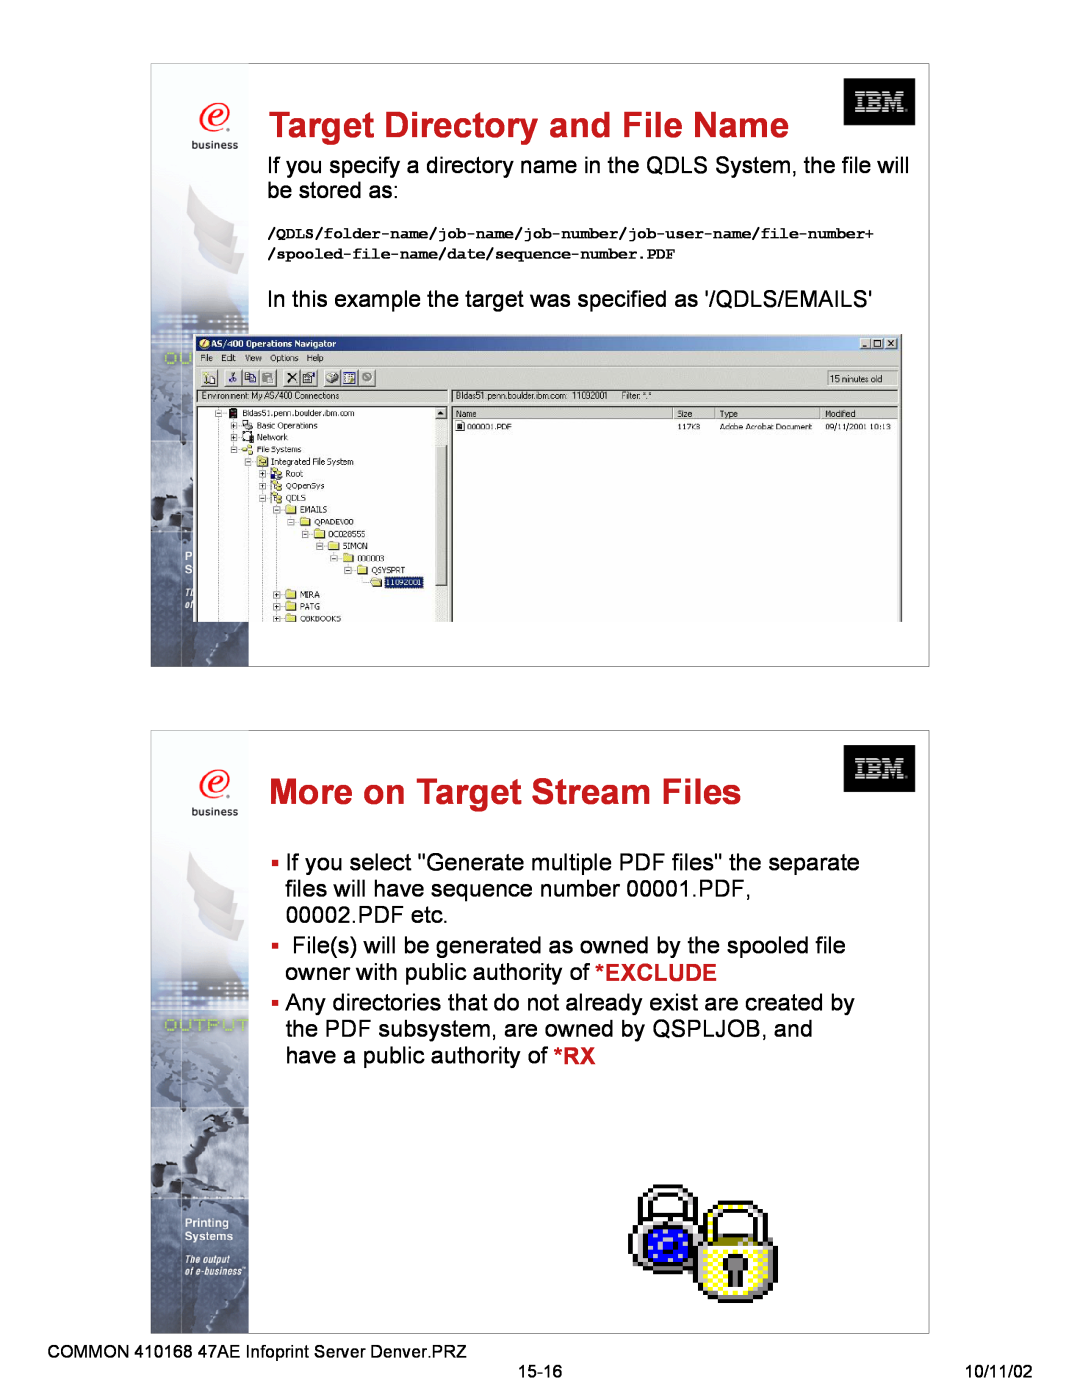 IBM 47AE - 410168 manual More on Target Stream Files, Target Directory and File Name 